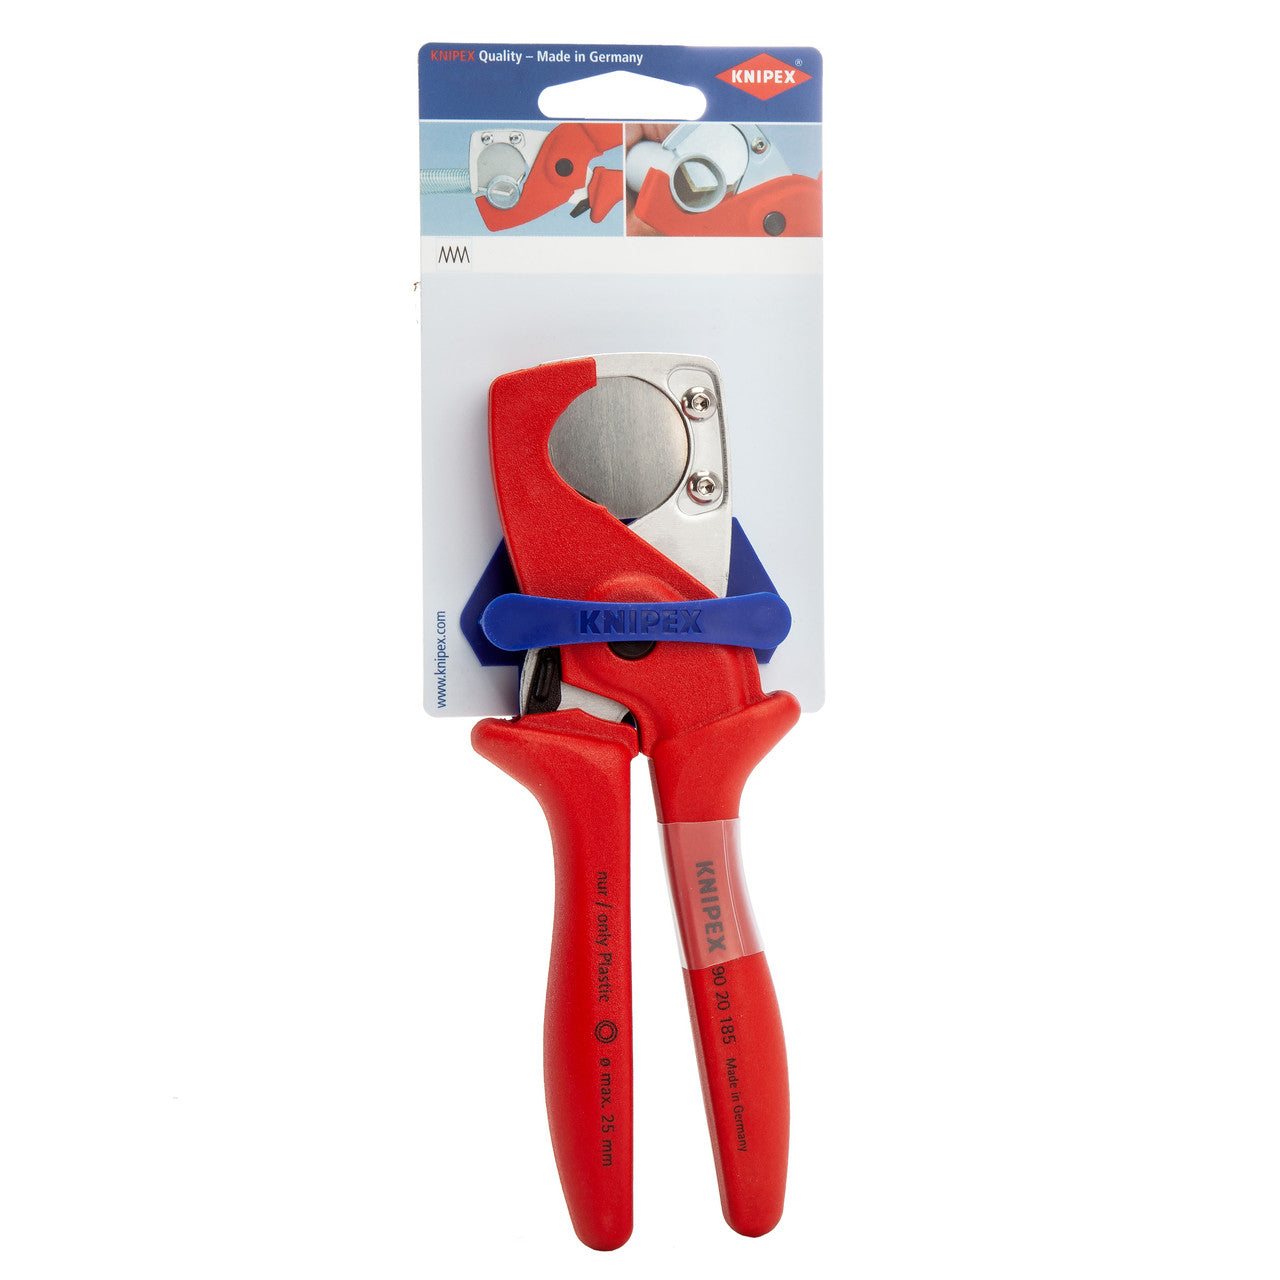 Knipex 9020185SB PlastiCut Cutter for Hoses and Conduit (25mm Diameter)